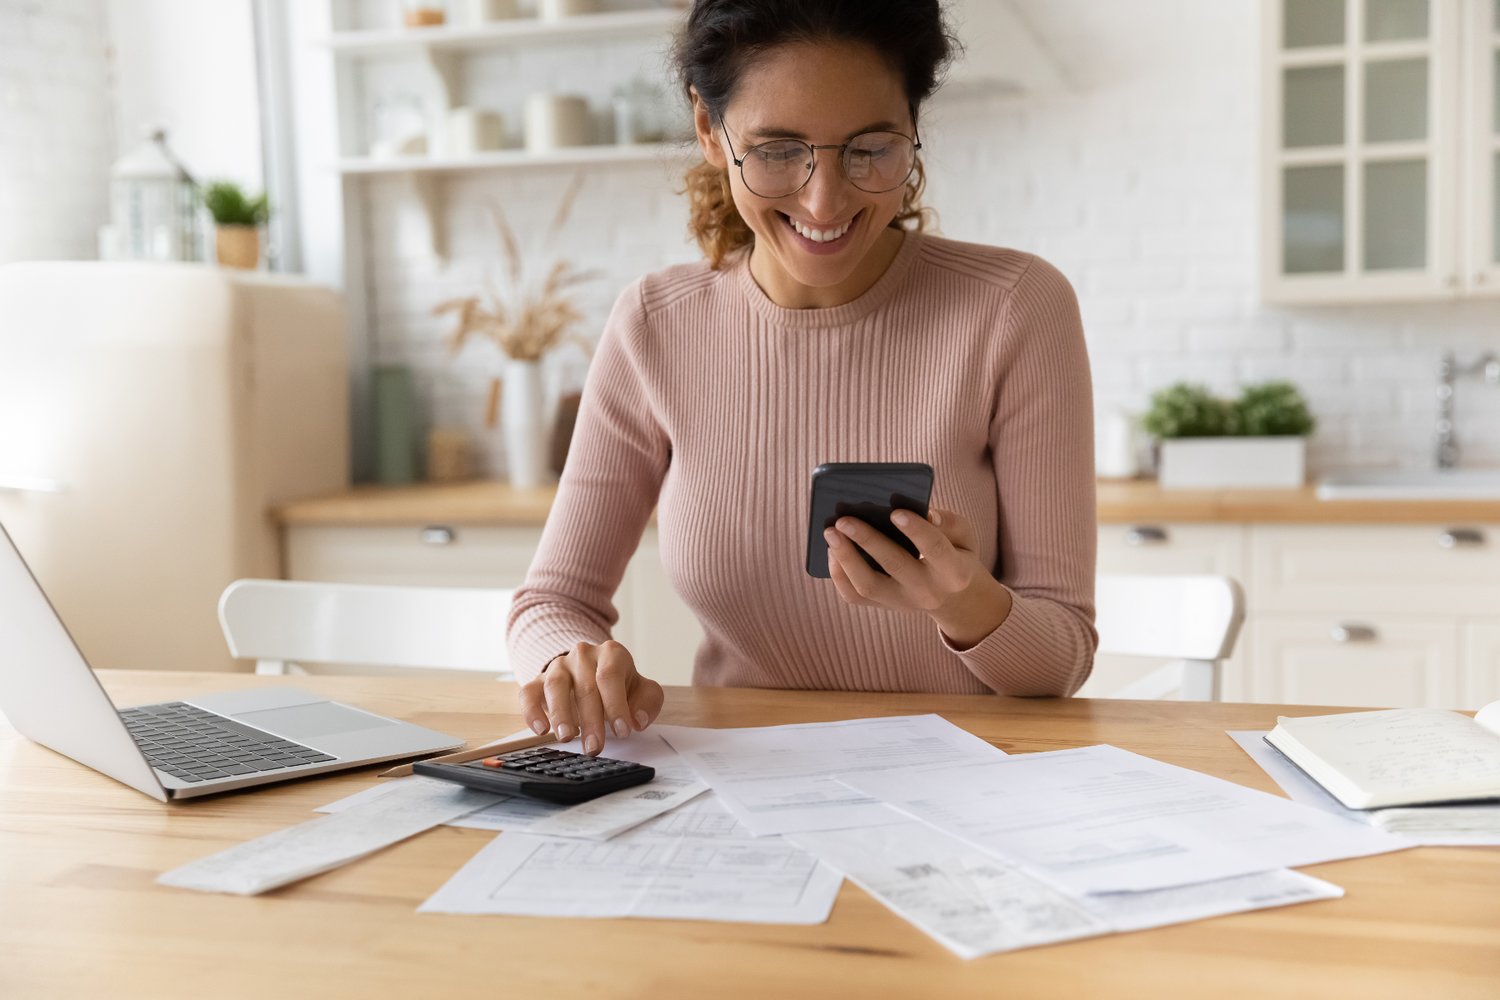 FINANCIAL SPRING CLEANING — It’s time to spring clean your finances and save money year-round. Start by reviewing your monthly expenses and see what you can adjust or live without.